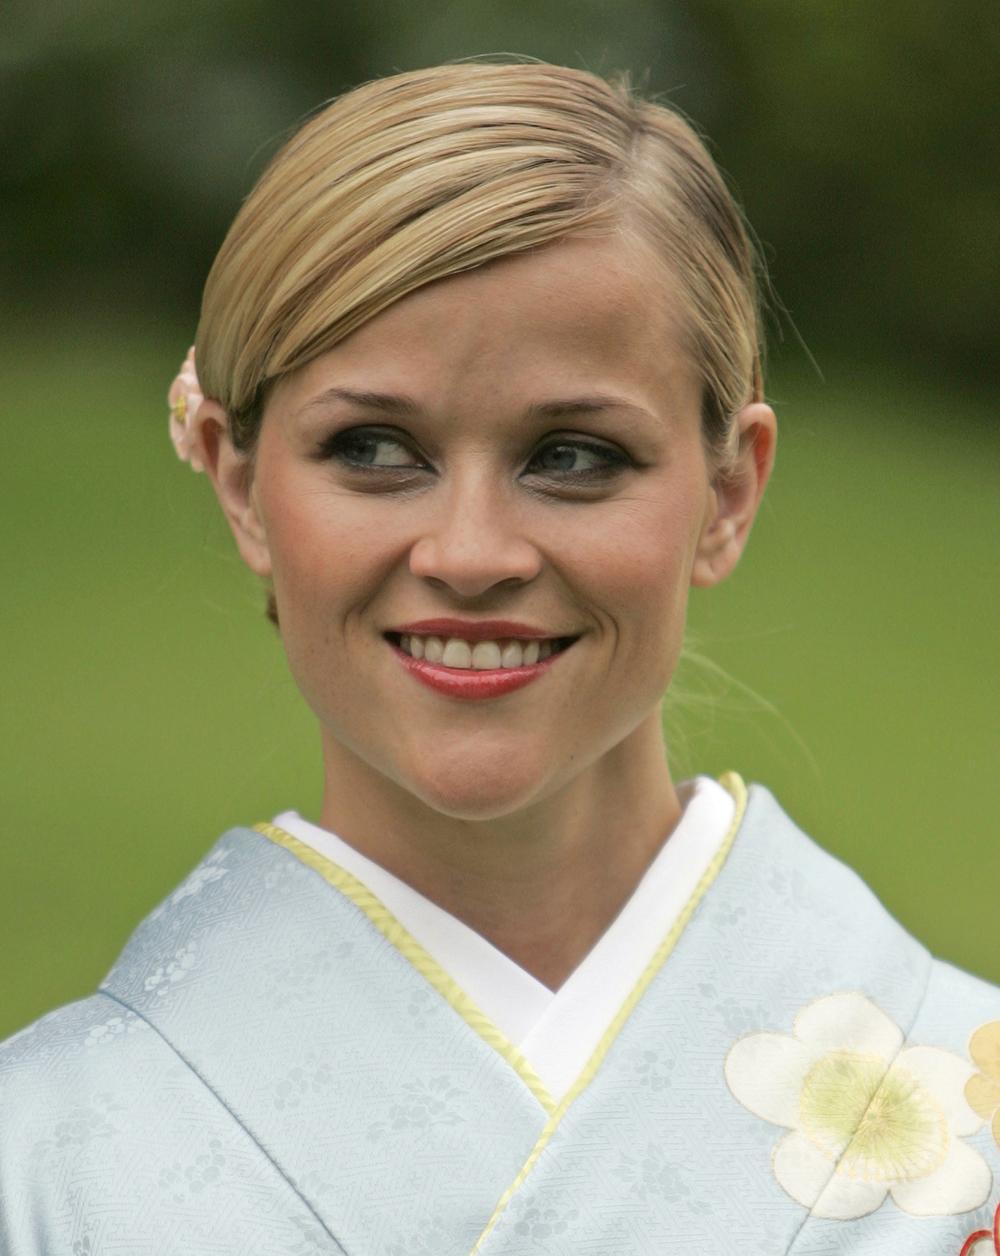 Photo №3780 Reese Witherspoon.